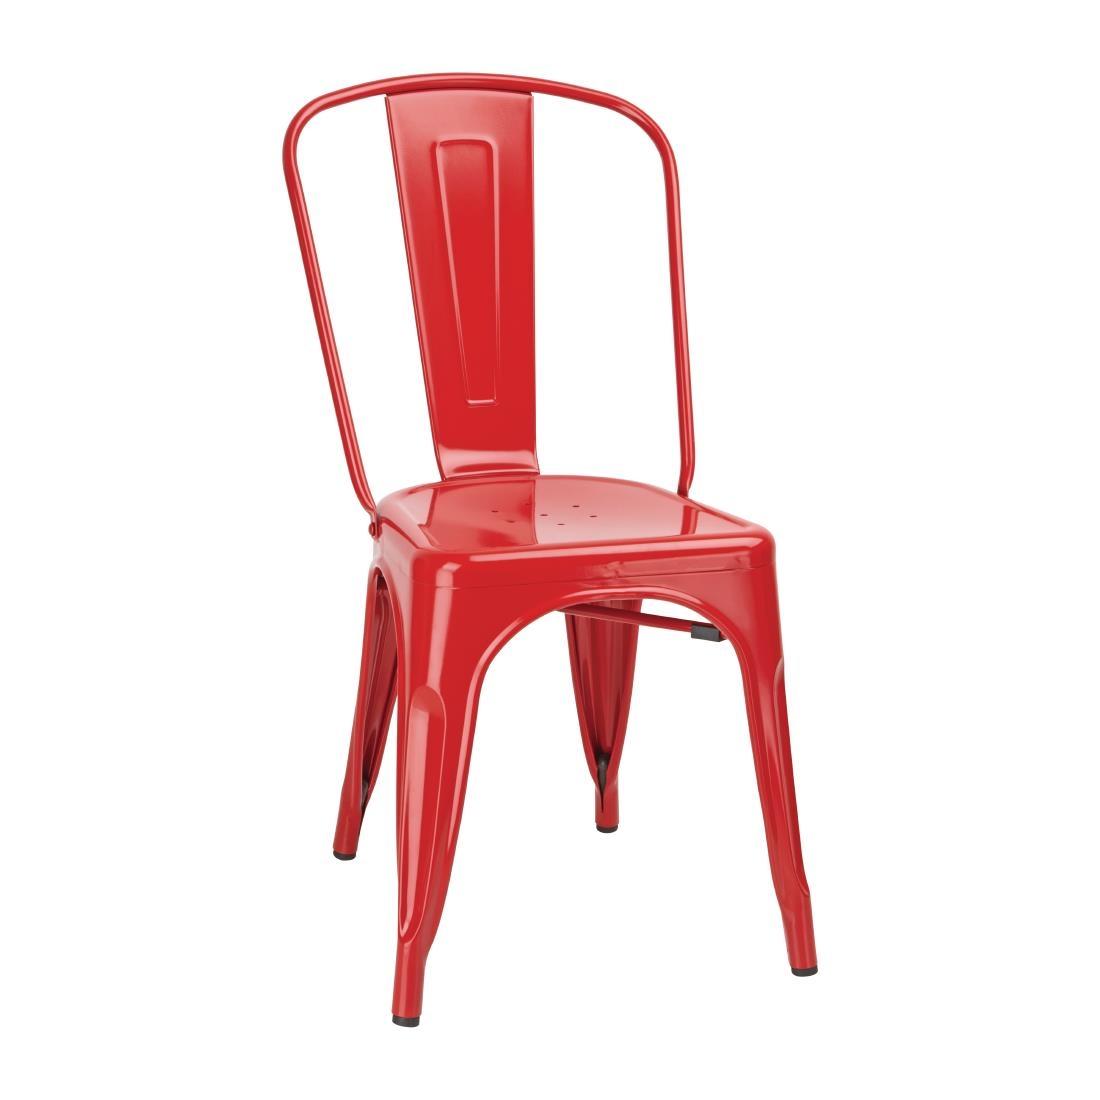 Bolero Bistro Steel Side Chair Red (Pack of 4) - GL330  - 1